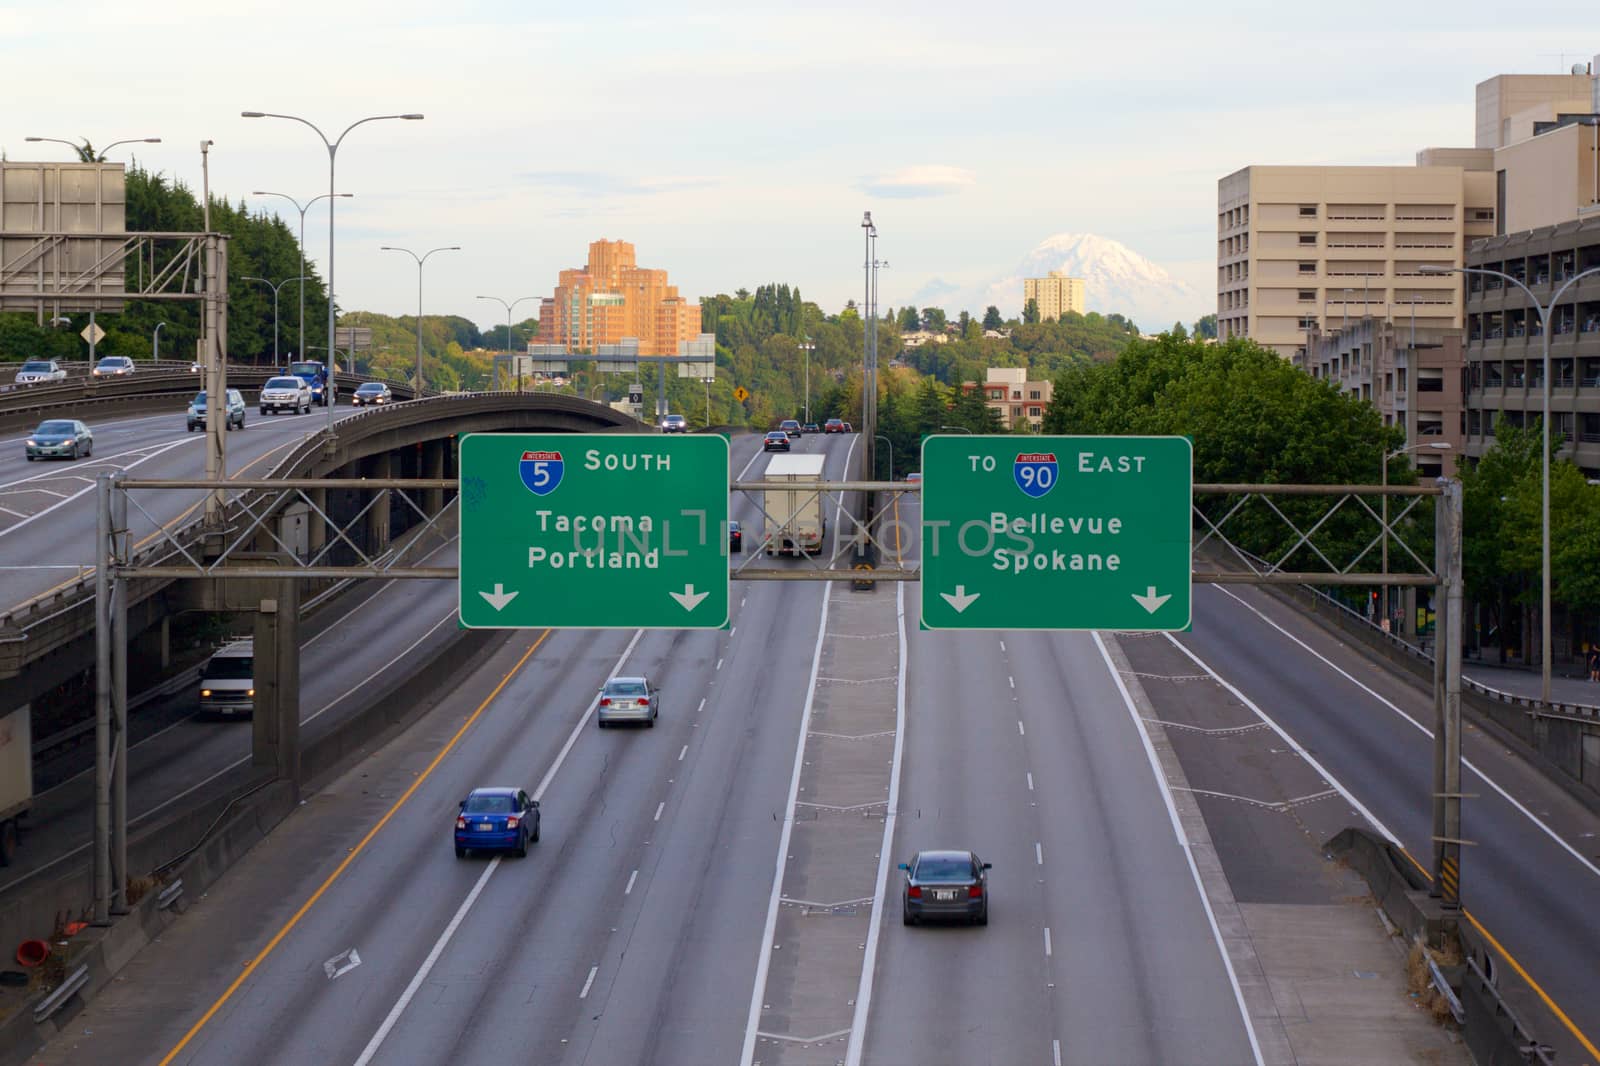 Seattle, WA - July 24, 2015 - View of I5 South with the Tacoma, Portland, Bellevue and Spokane directional sin